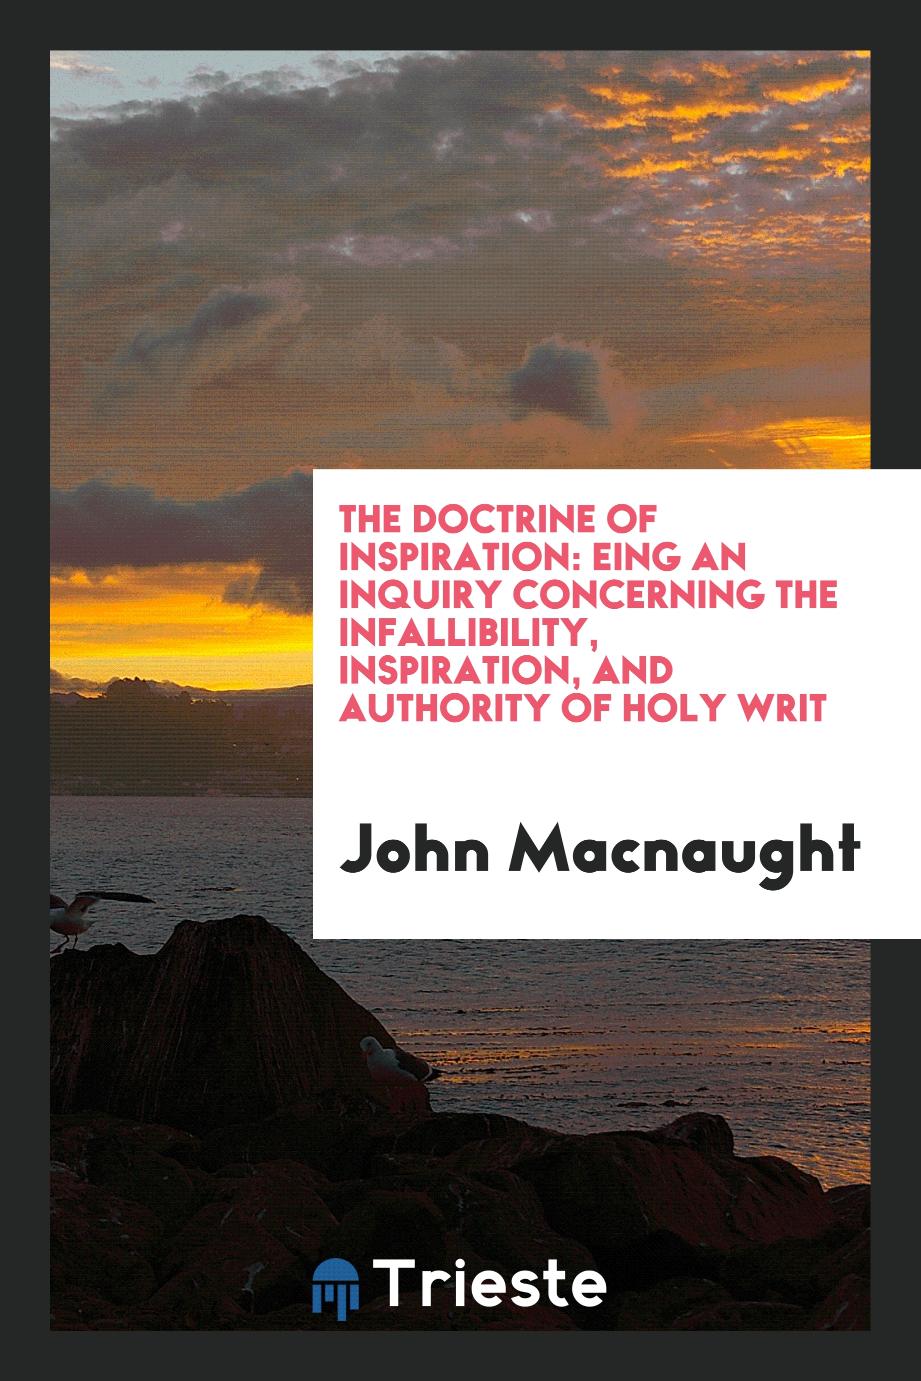 The doctrine of inspiration: being an inquiry concerning the infallibility, inspiration, and authority of Holy Writ